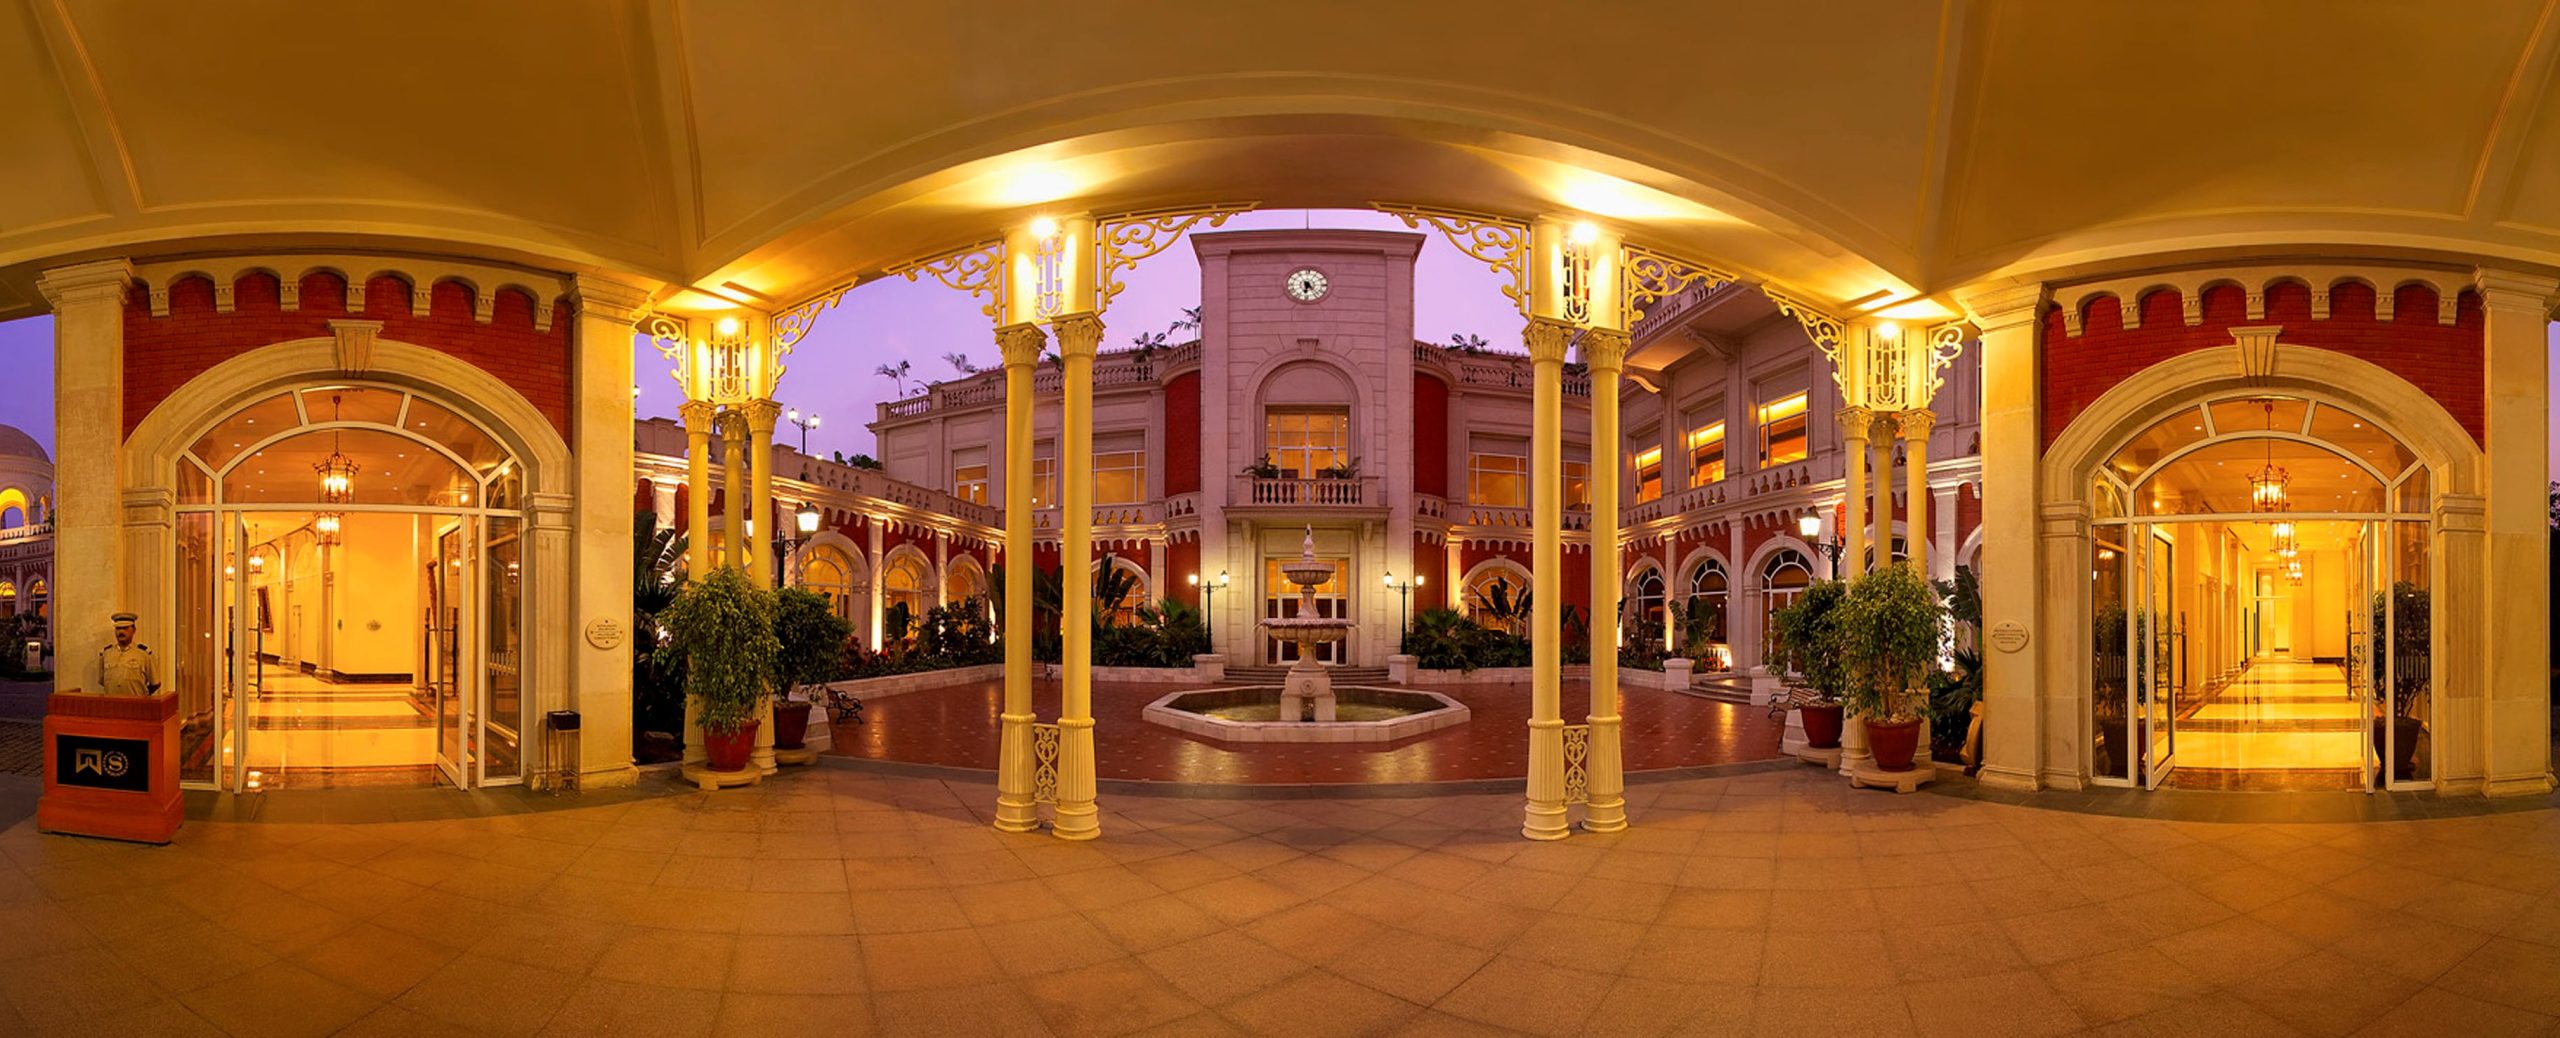 ITC-GRAND-CENTRAL-PIC-COURTYARD-2-1-scaled.jpg